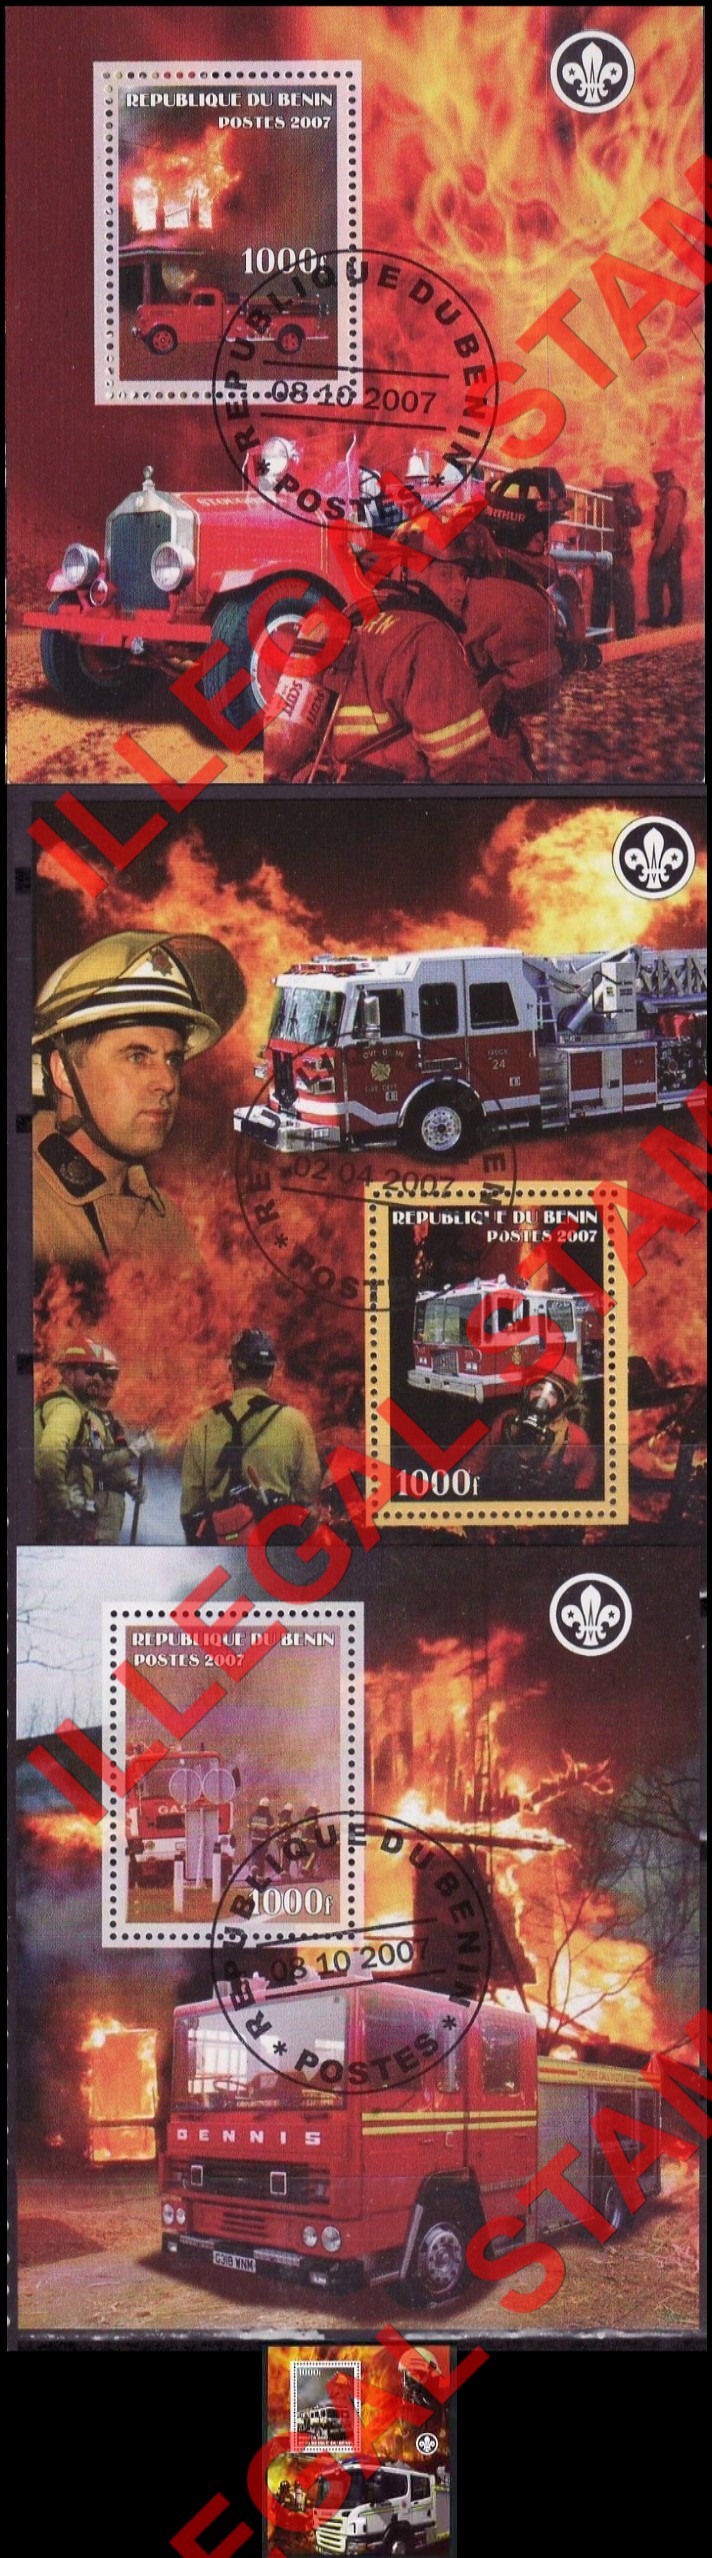 Benin 2007 Fire Engines Illegal Stamp Souvenir Sheets of 1